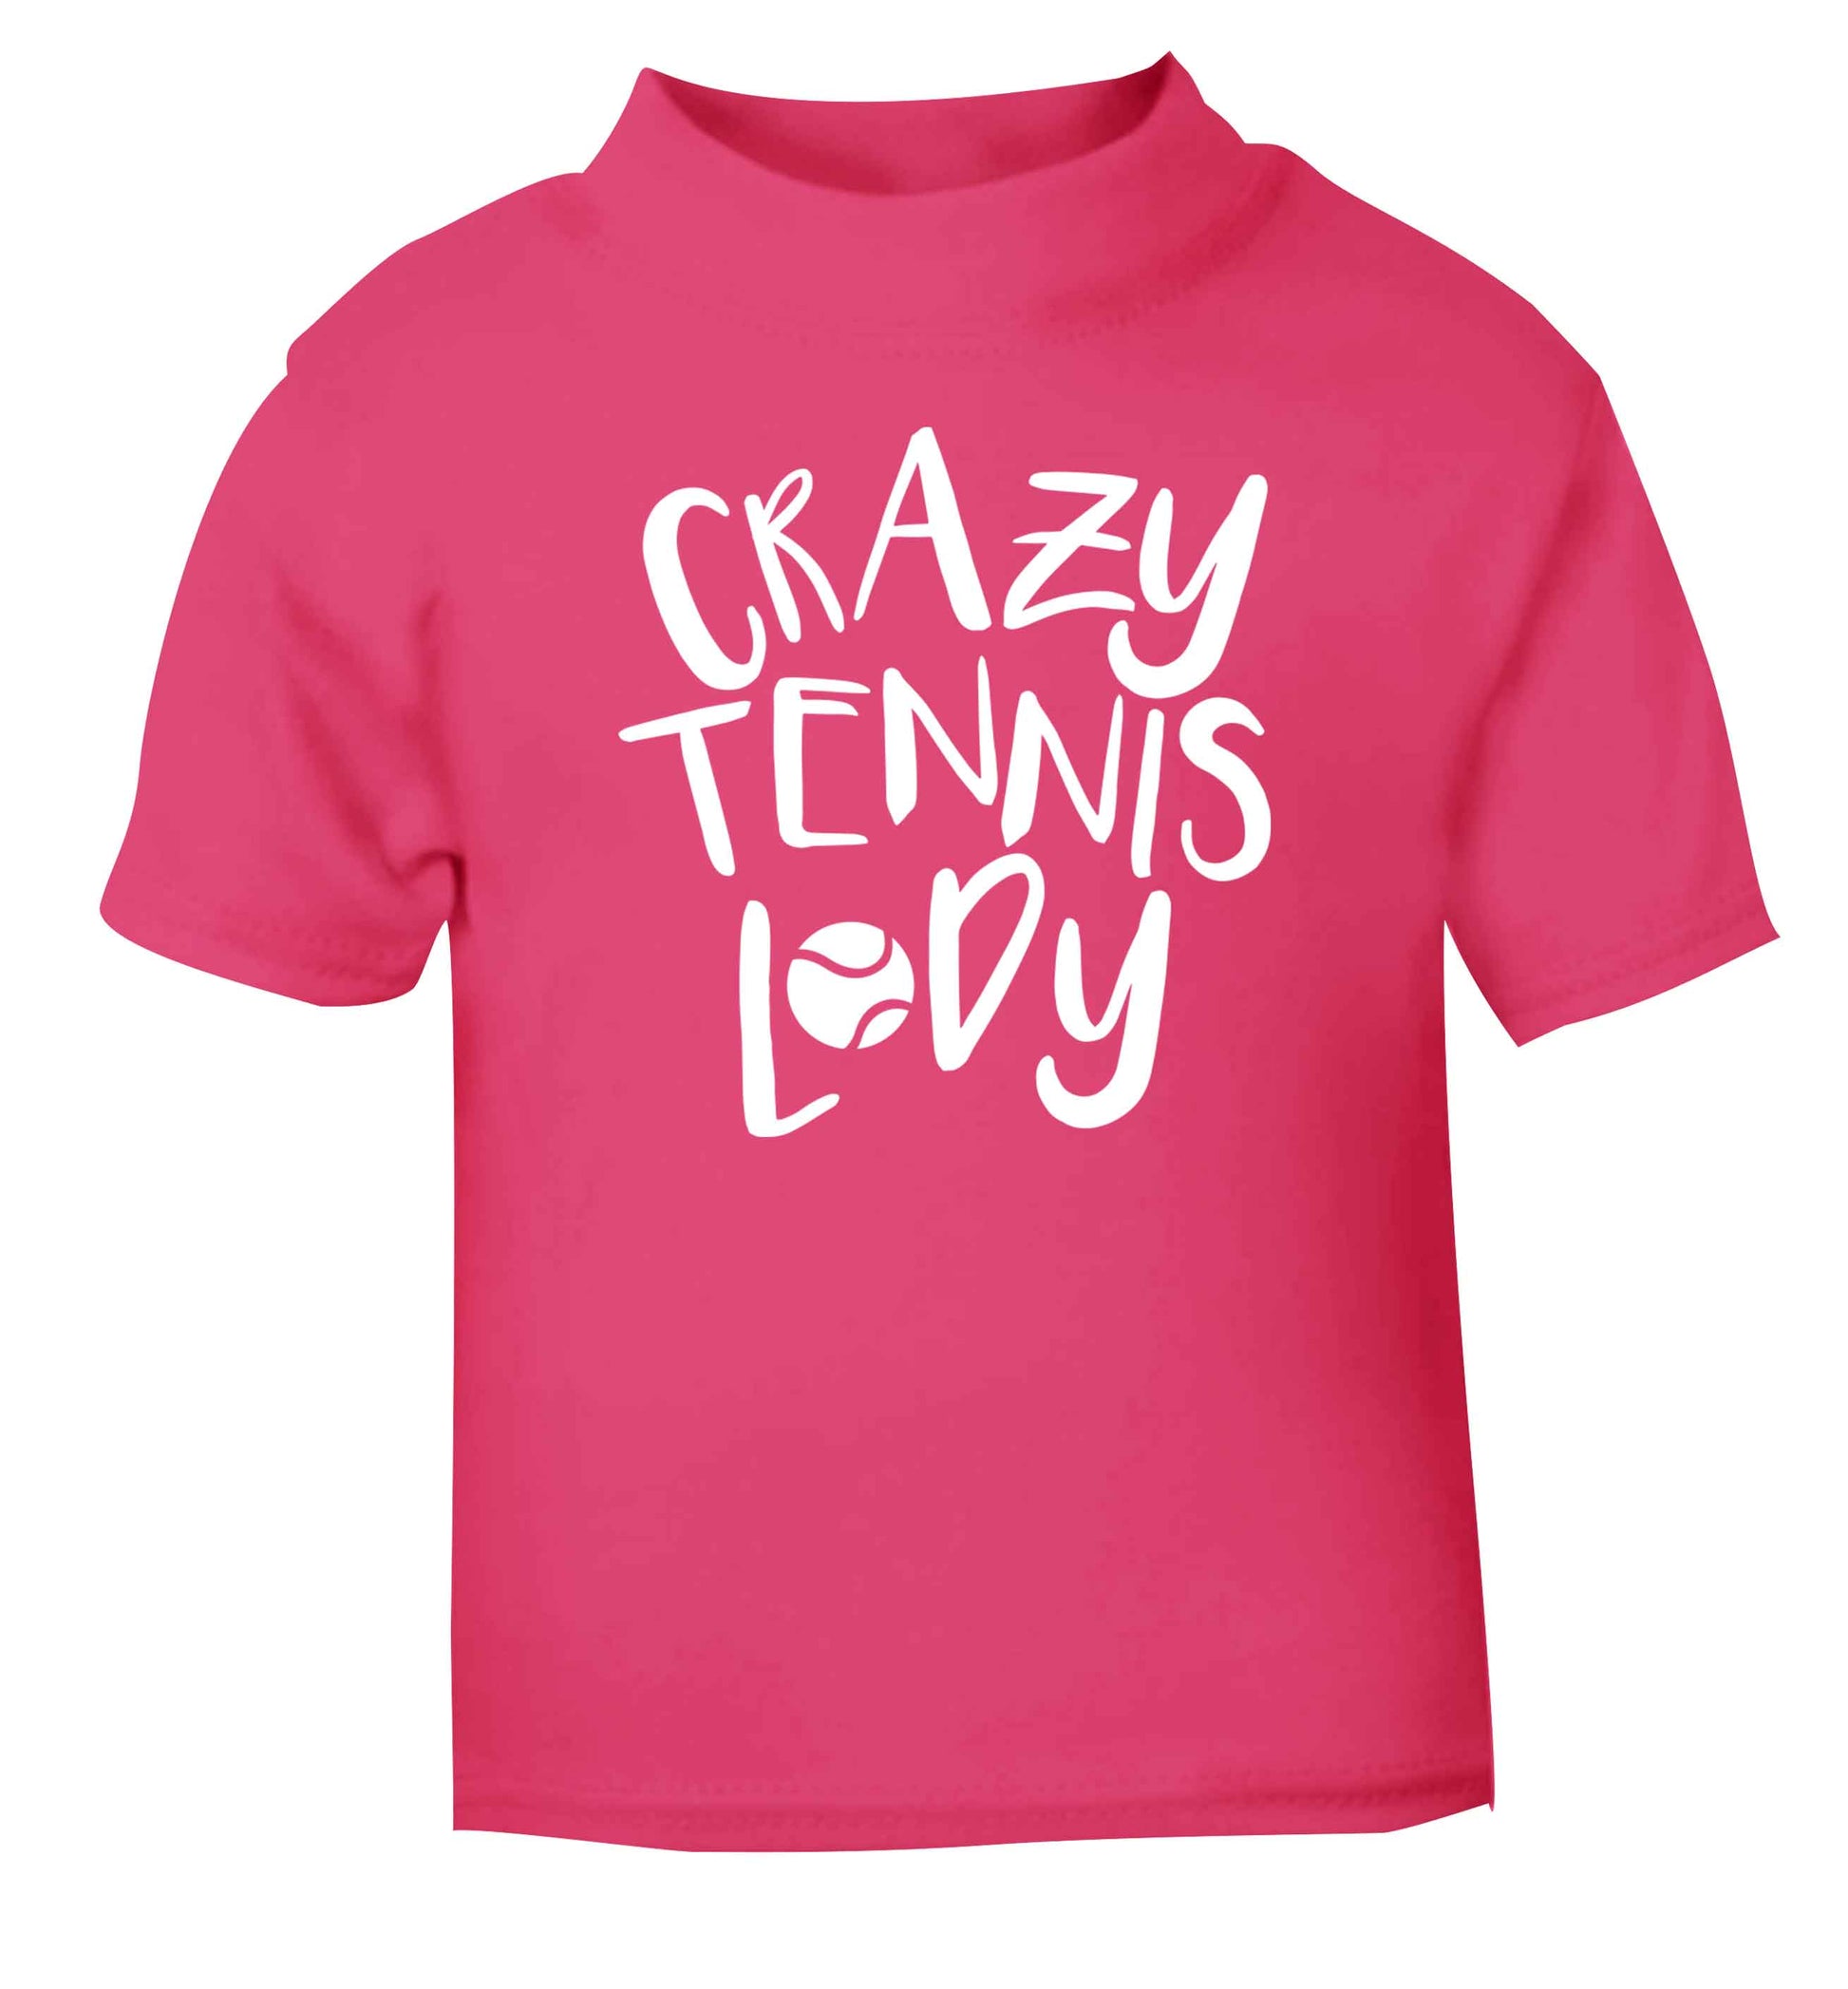 Crazy tennis lady pink Baby Toddler Tshirt 2 Years